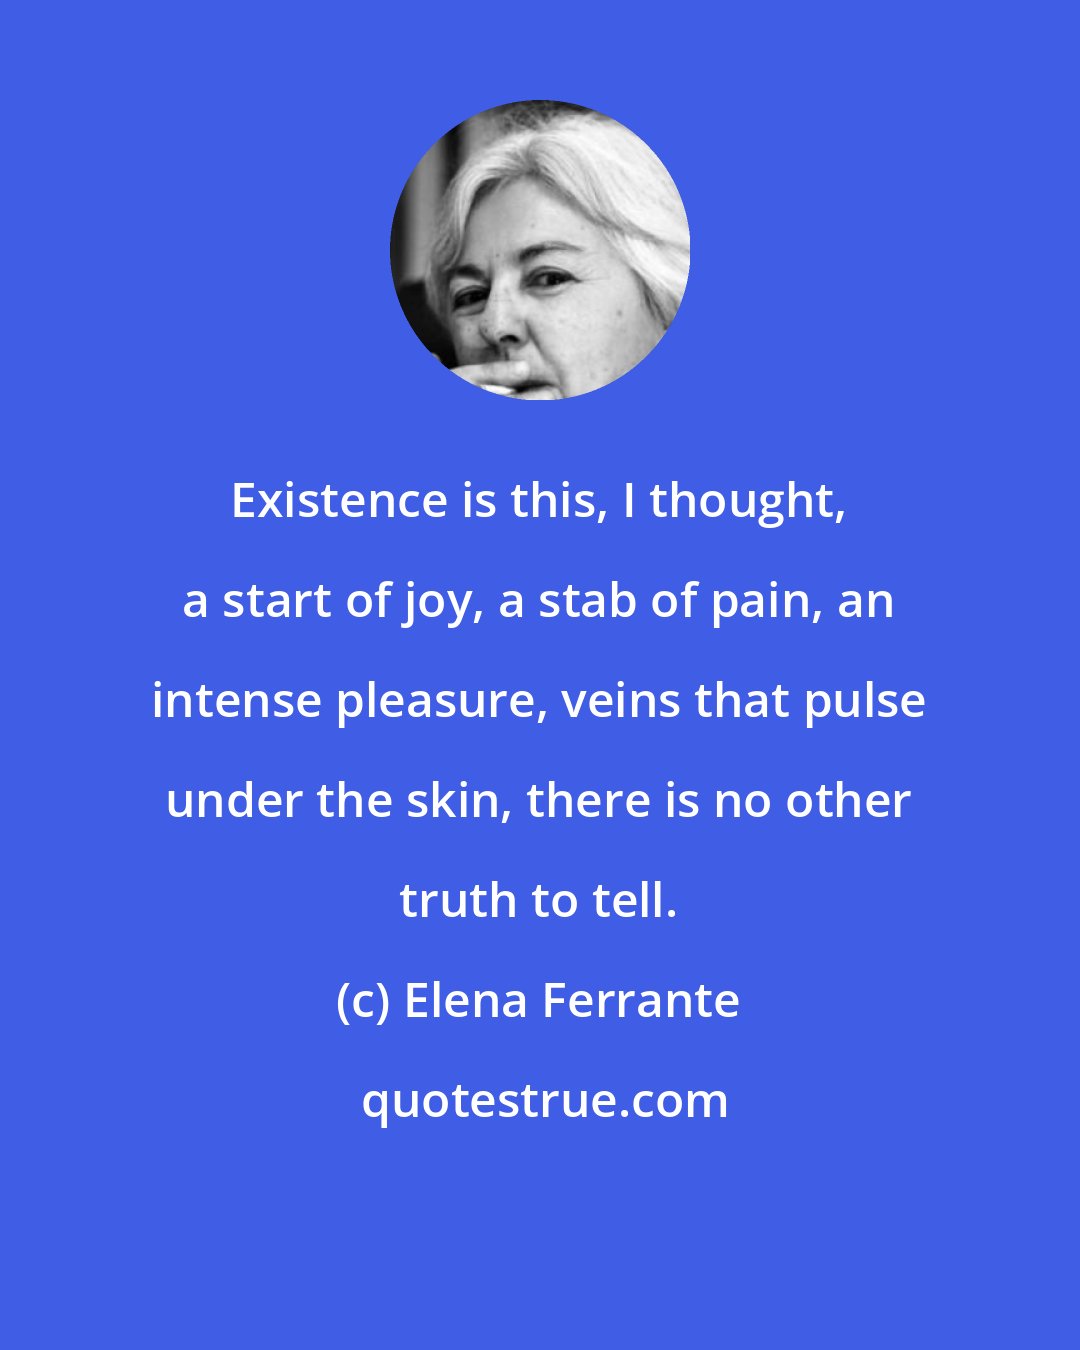 Elena Ferrante: Existence is this, I thought, a start of joy, a stab of pain, an intense pleasure, veins that pulse under the skin, there is no other truth to tell.